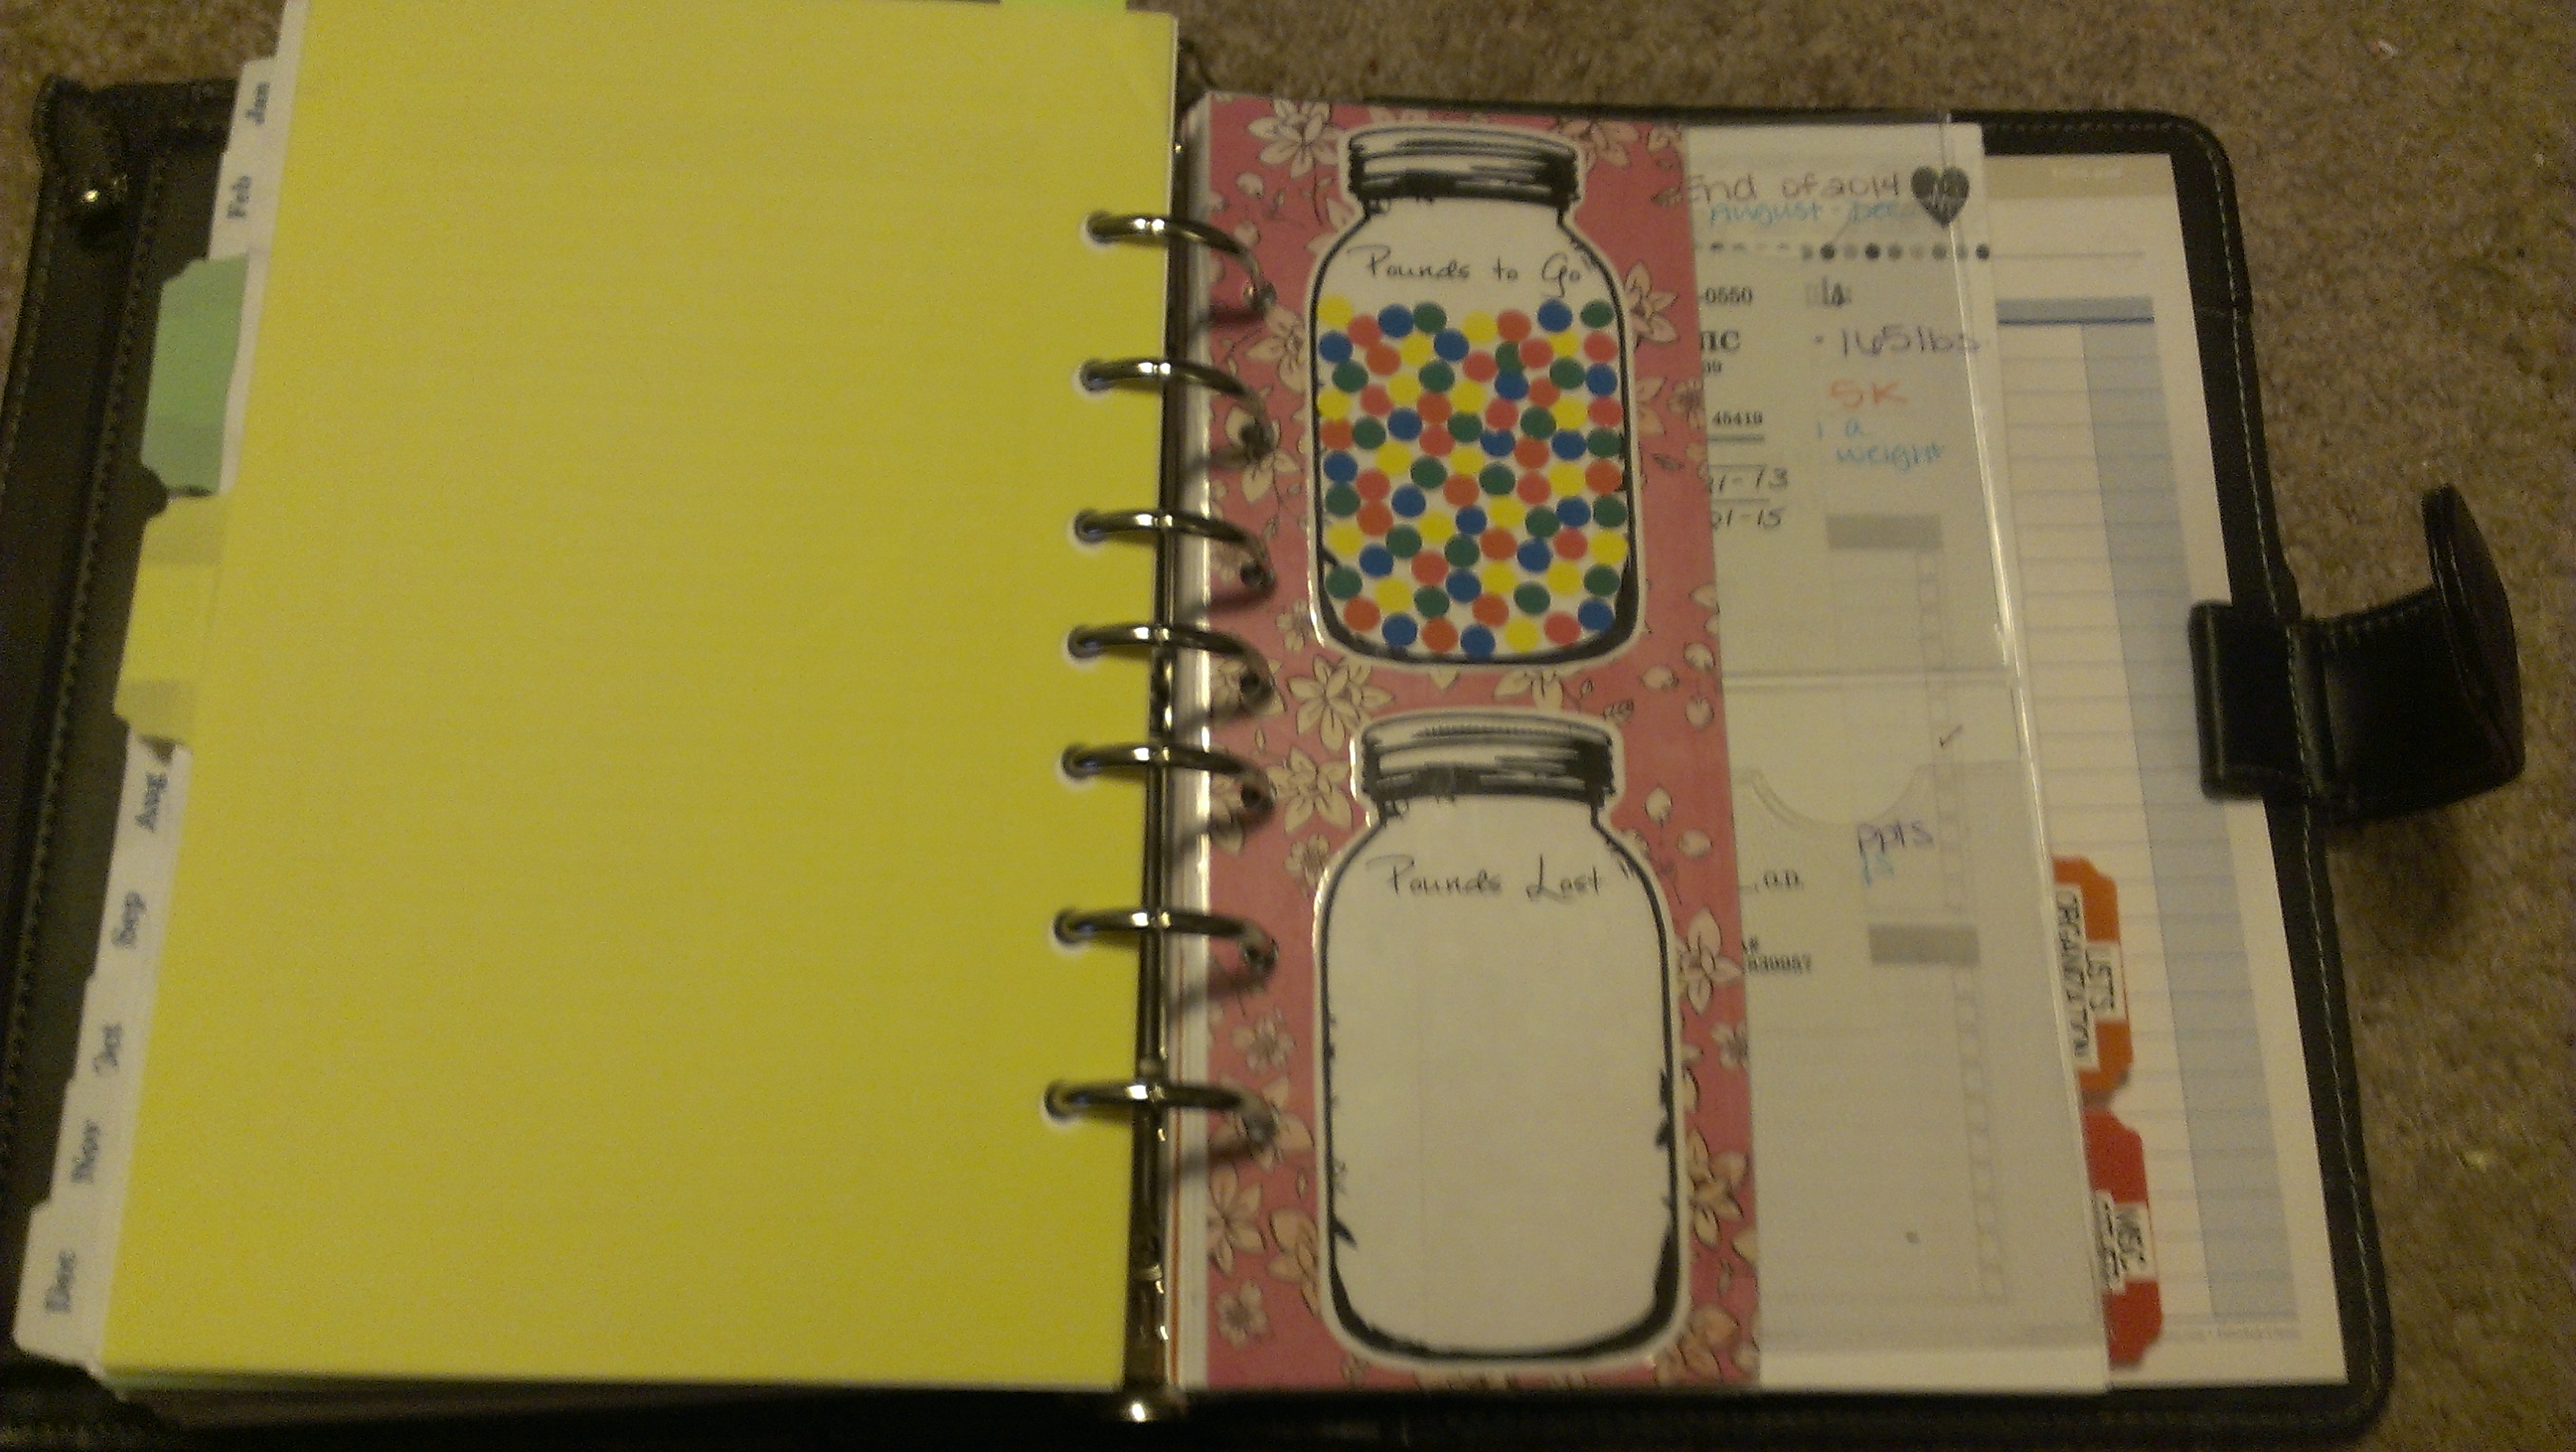 Creative way to track weight loss in Theresa's Franklin Covey Planner